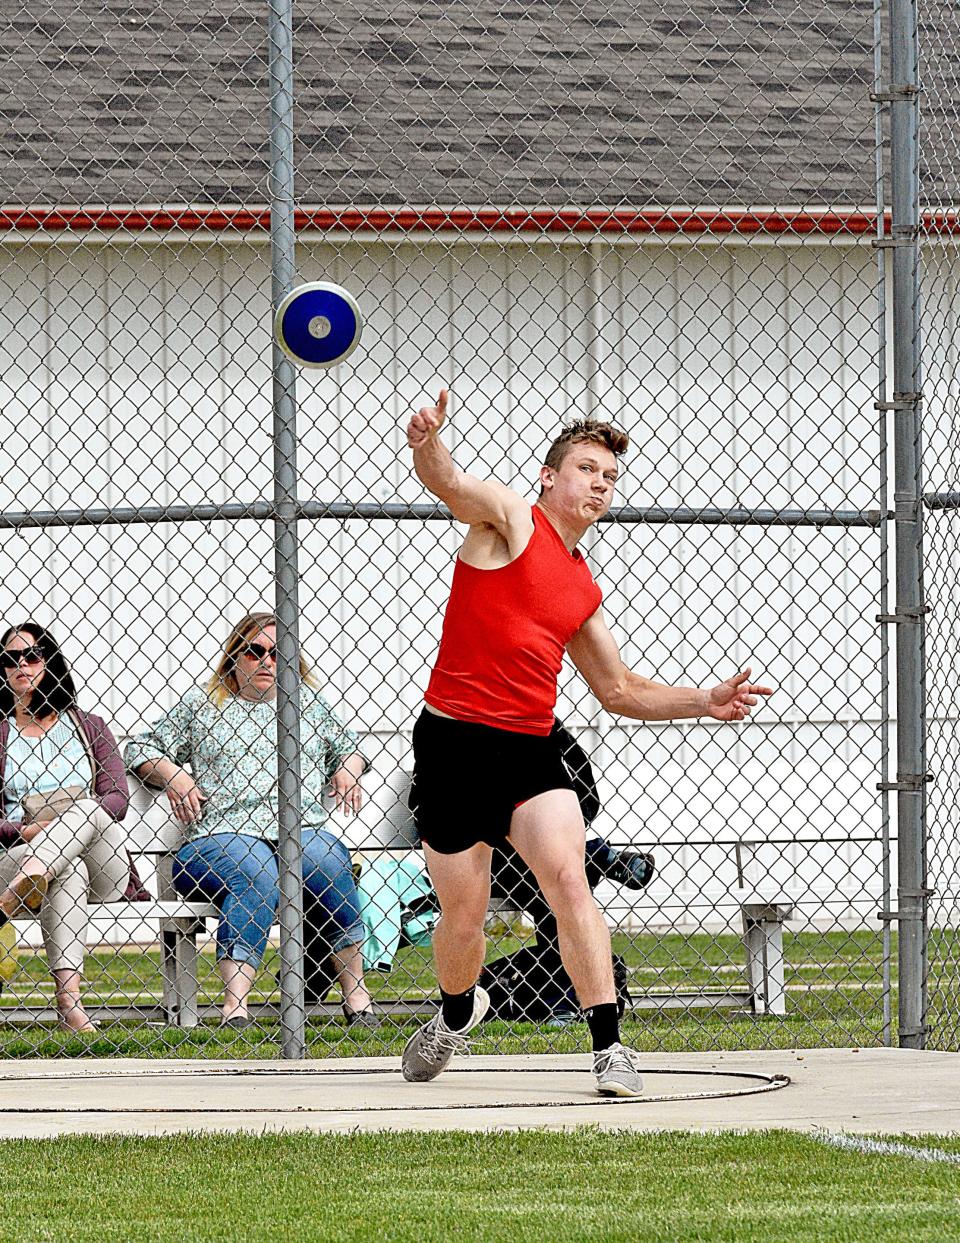 Tekonsha's Wyatt Blashfield, shown here during his sophomore season, booked his return trip to the MHSAA State Finals in the discus.